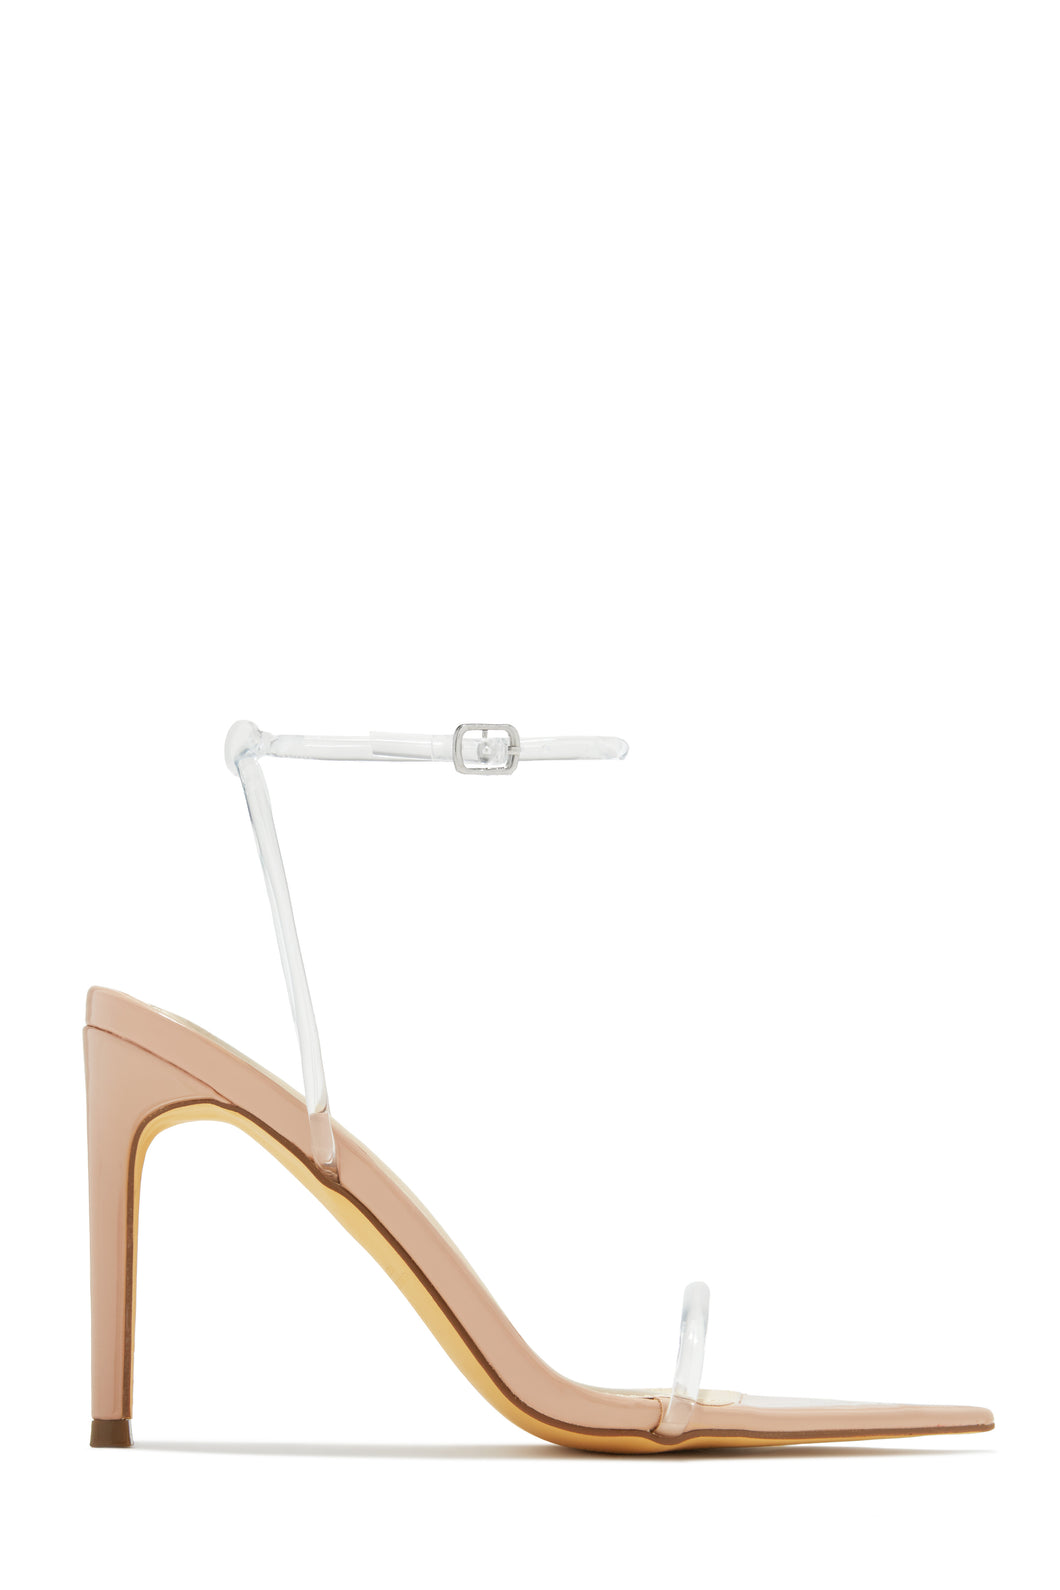 Nude Heels with Clear Straps